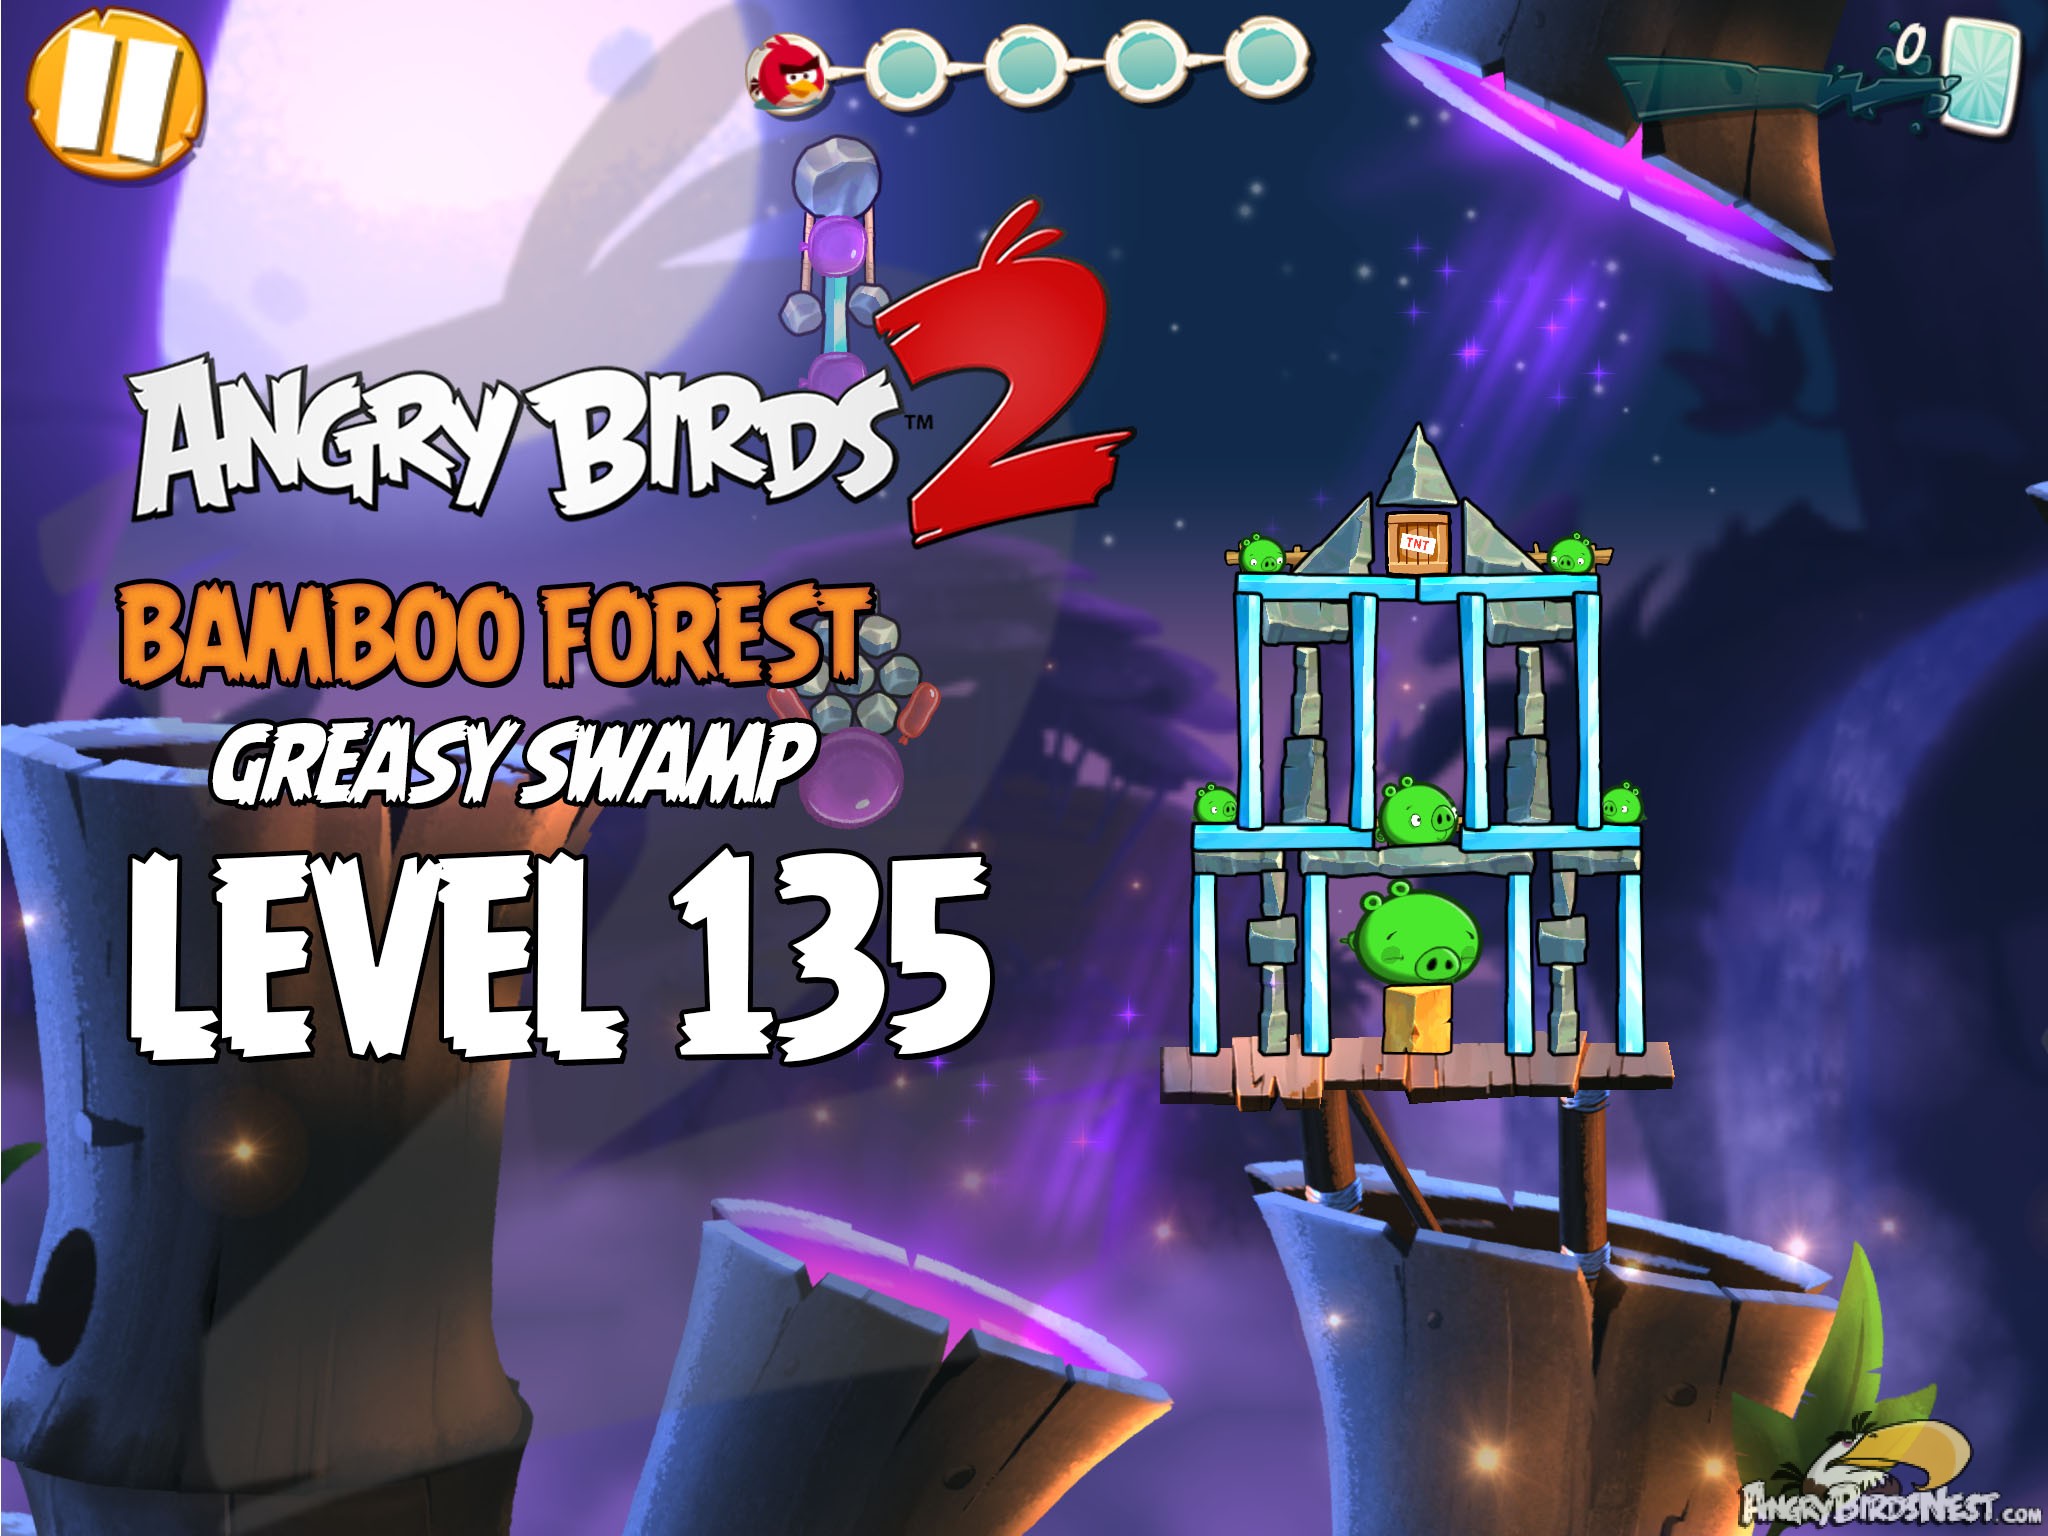 Angry Birds 2 Bamboo Forest Greasy Swamp Level 135